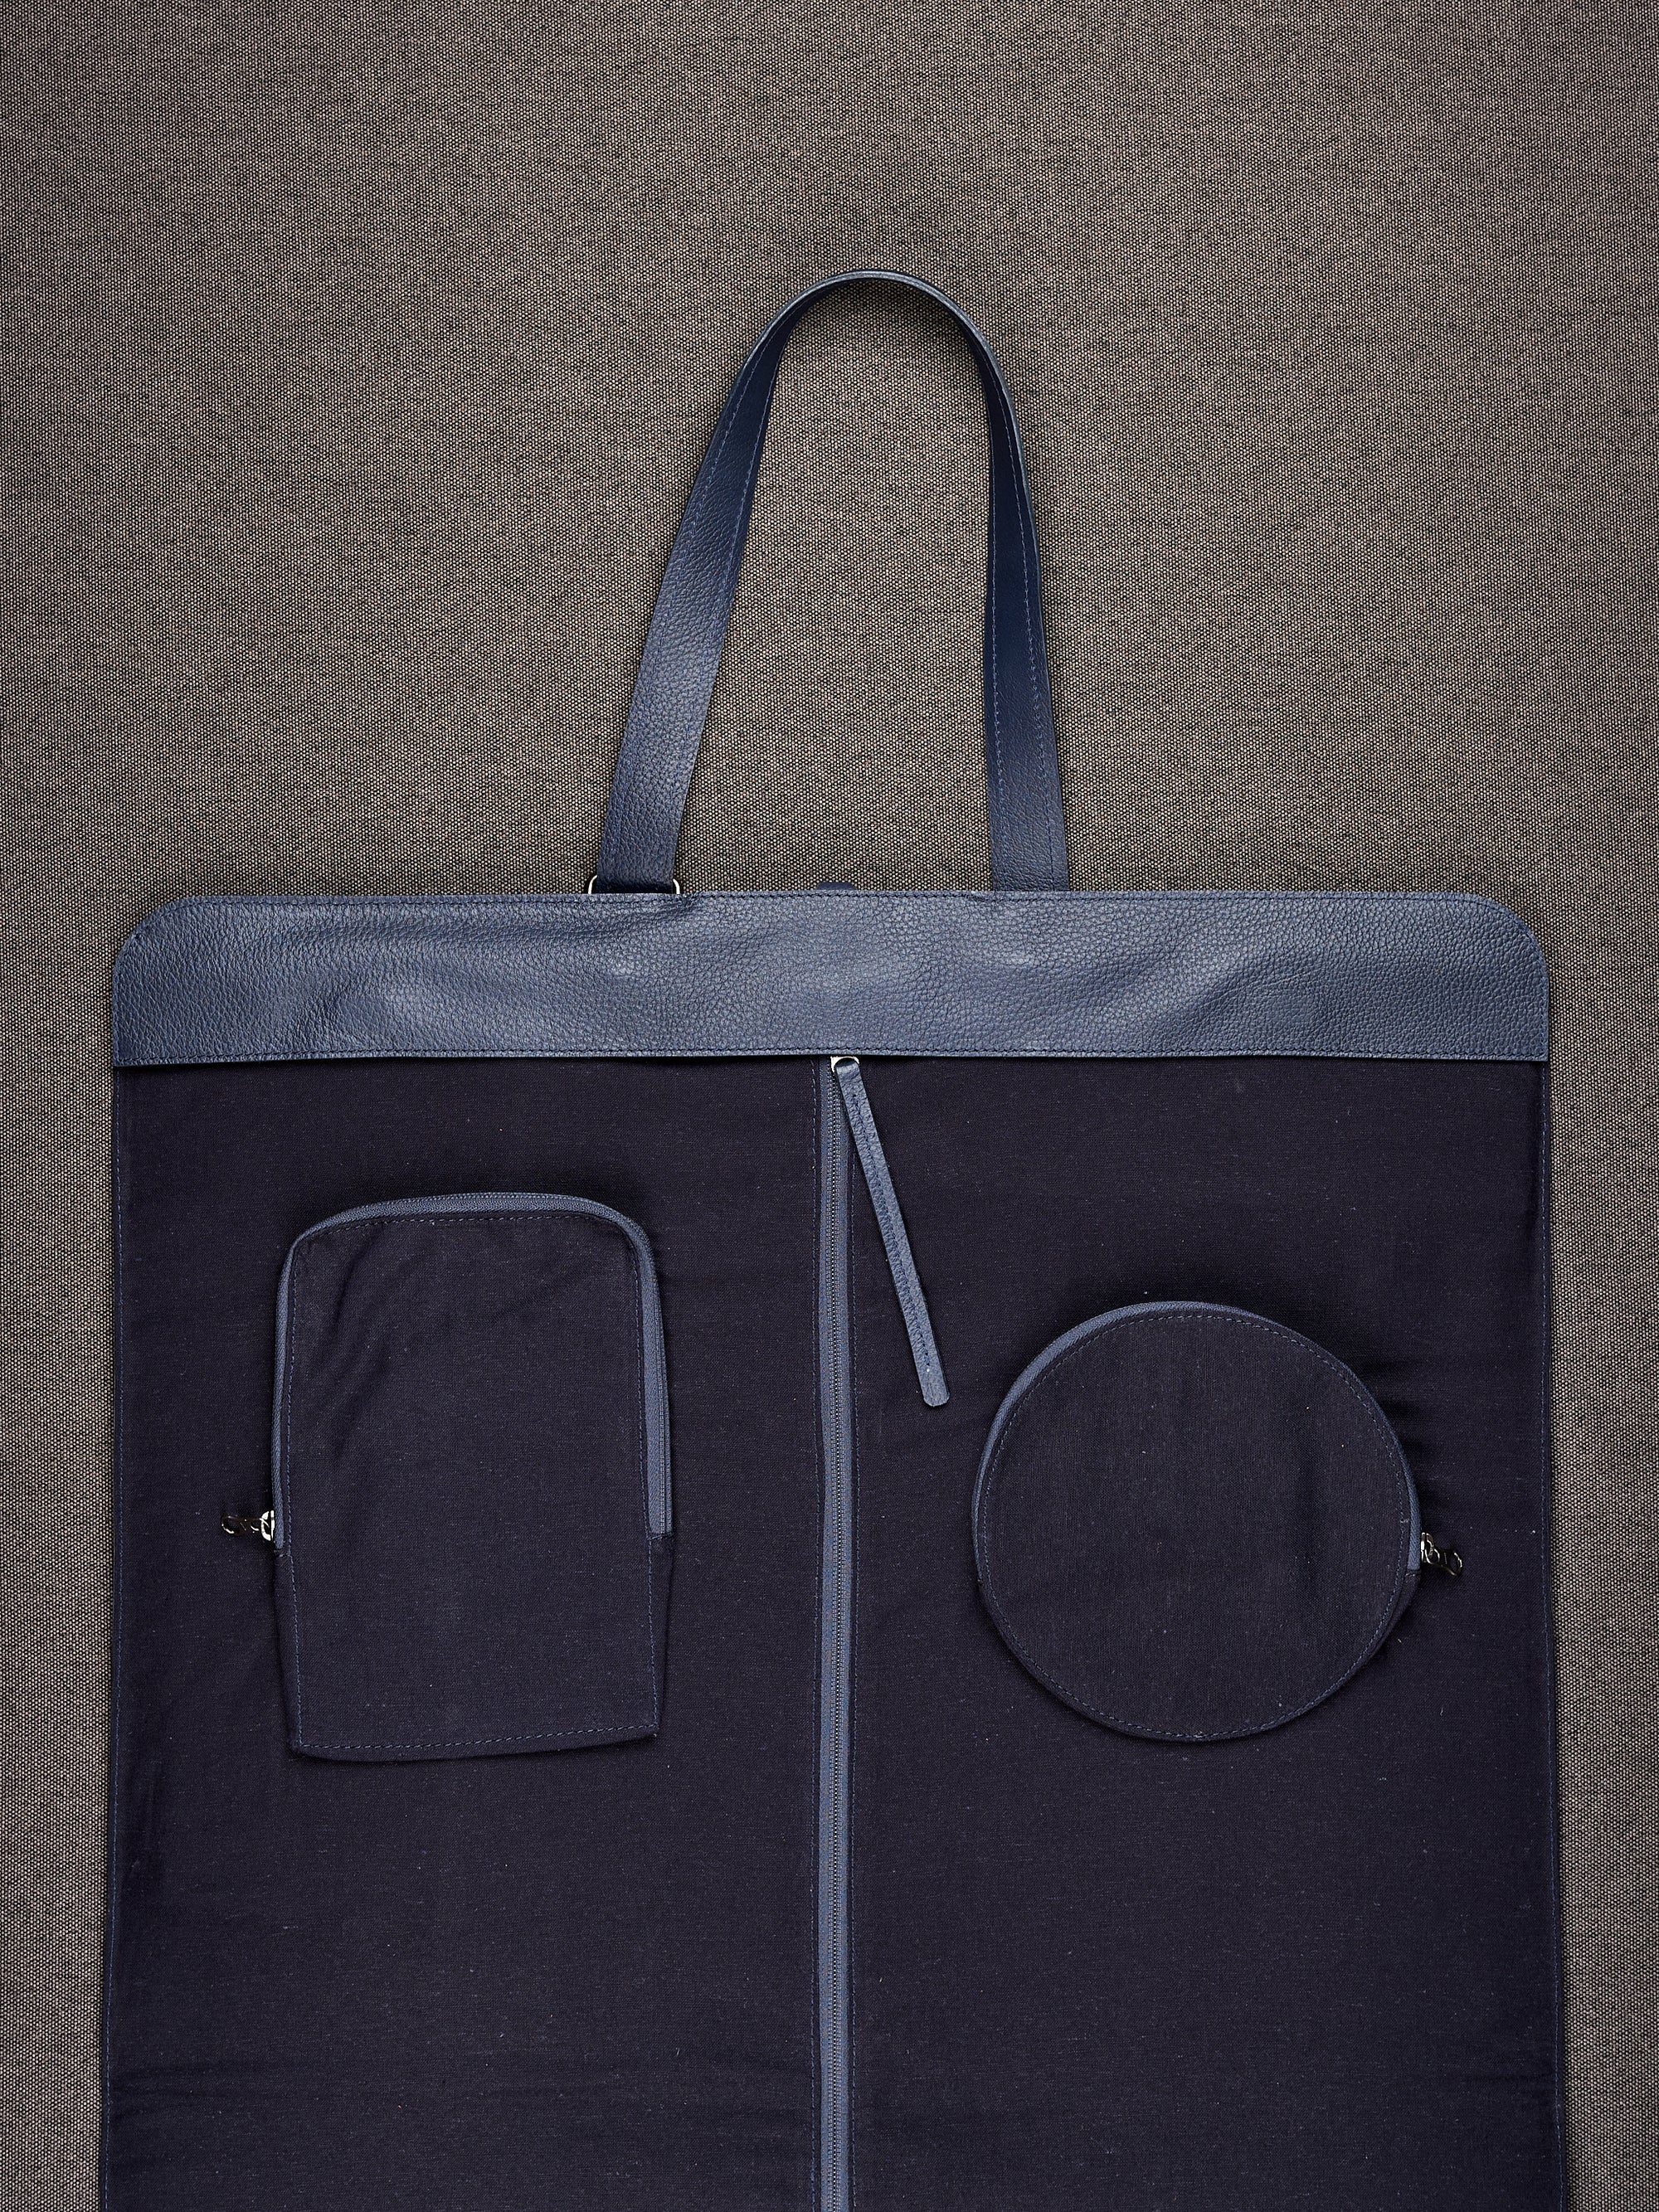 Internal Pockets. Foldable Suit Bag Navy by Capra Leather